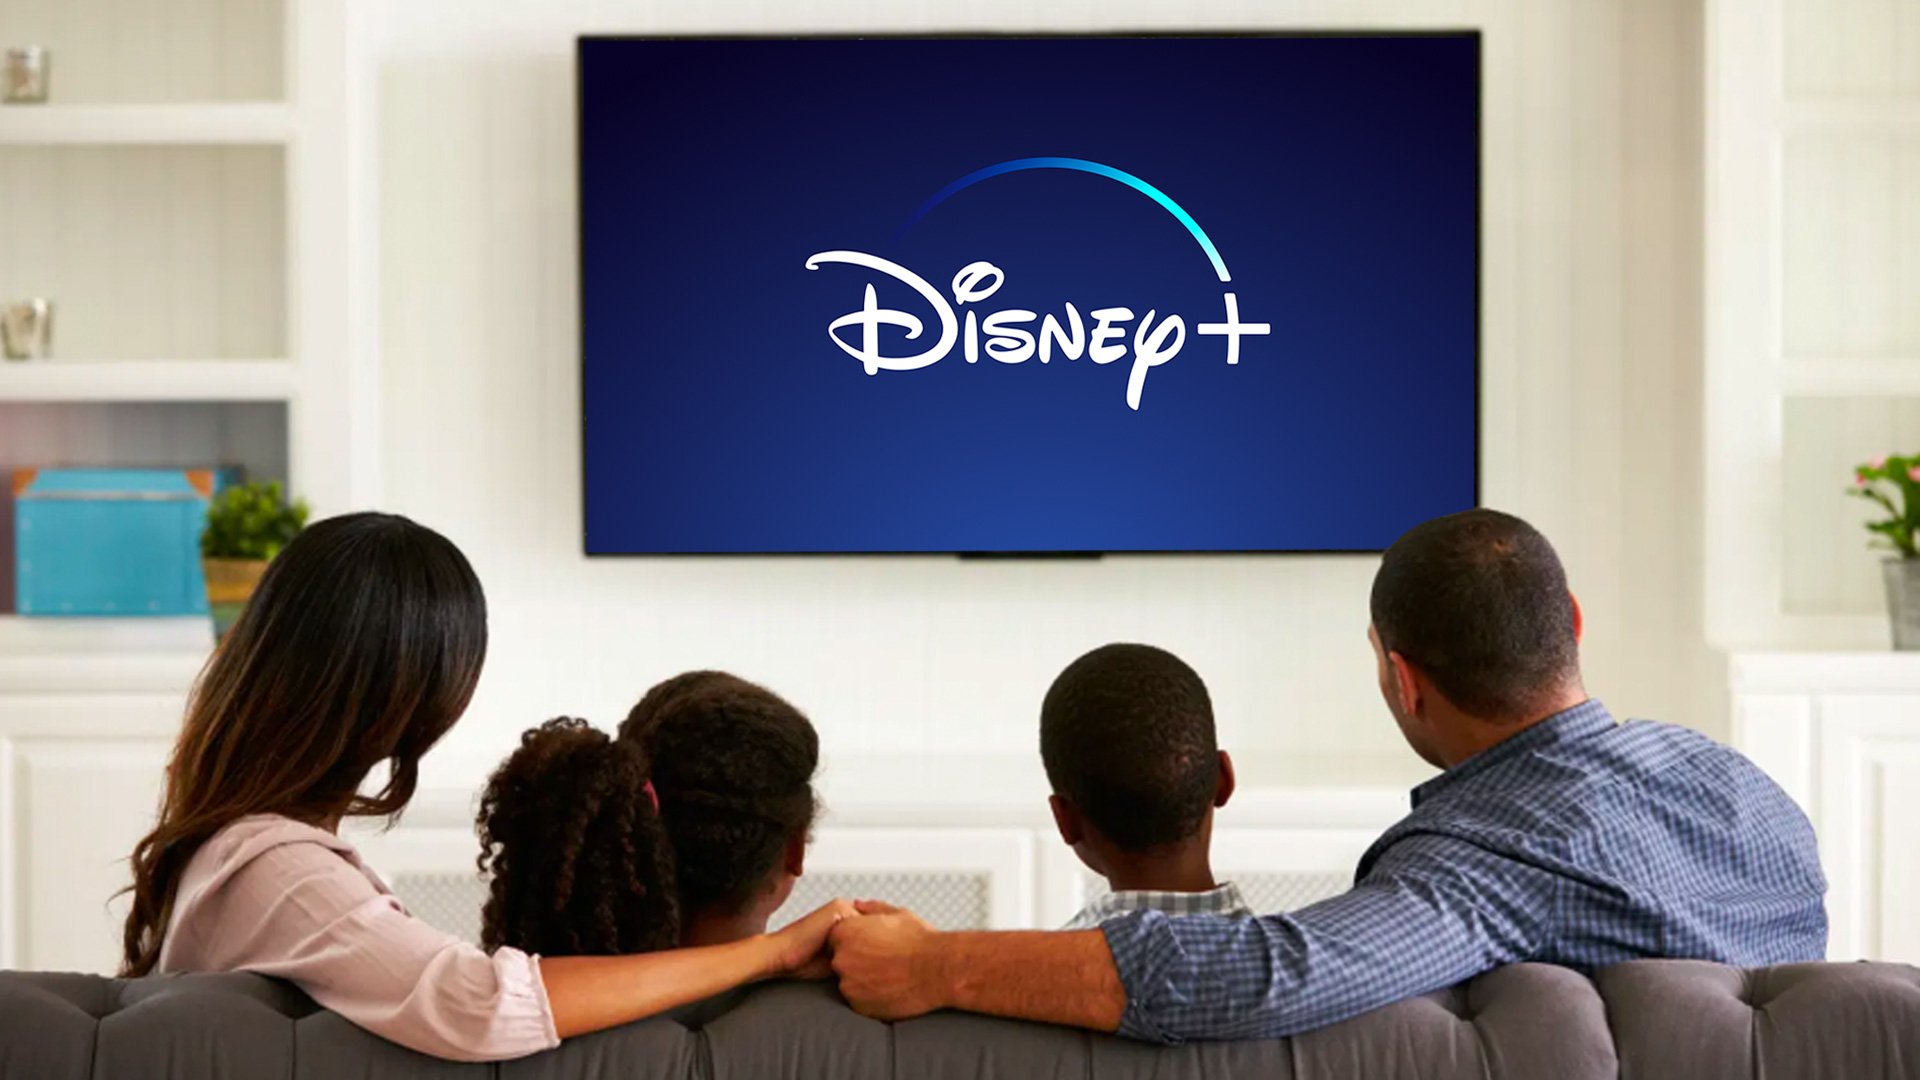 A family watching Disney +